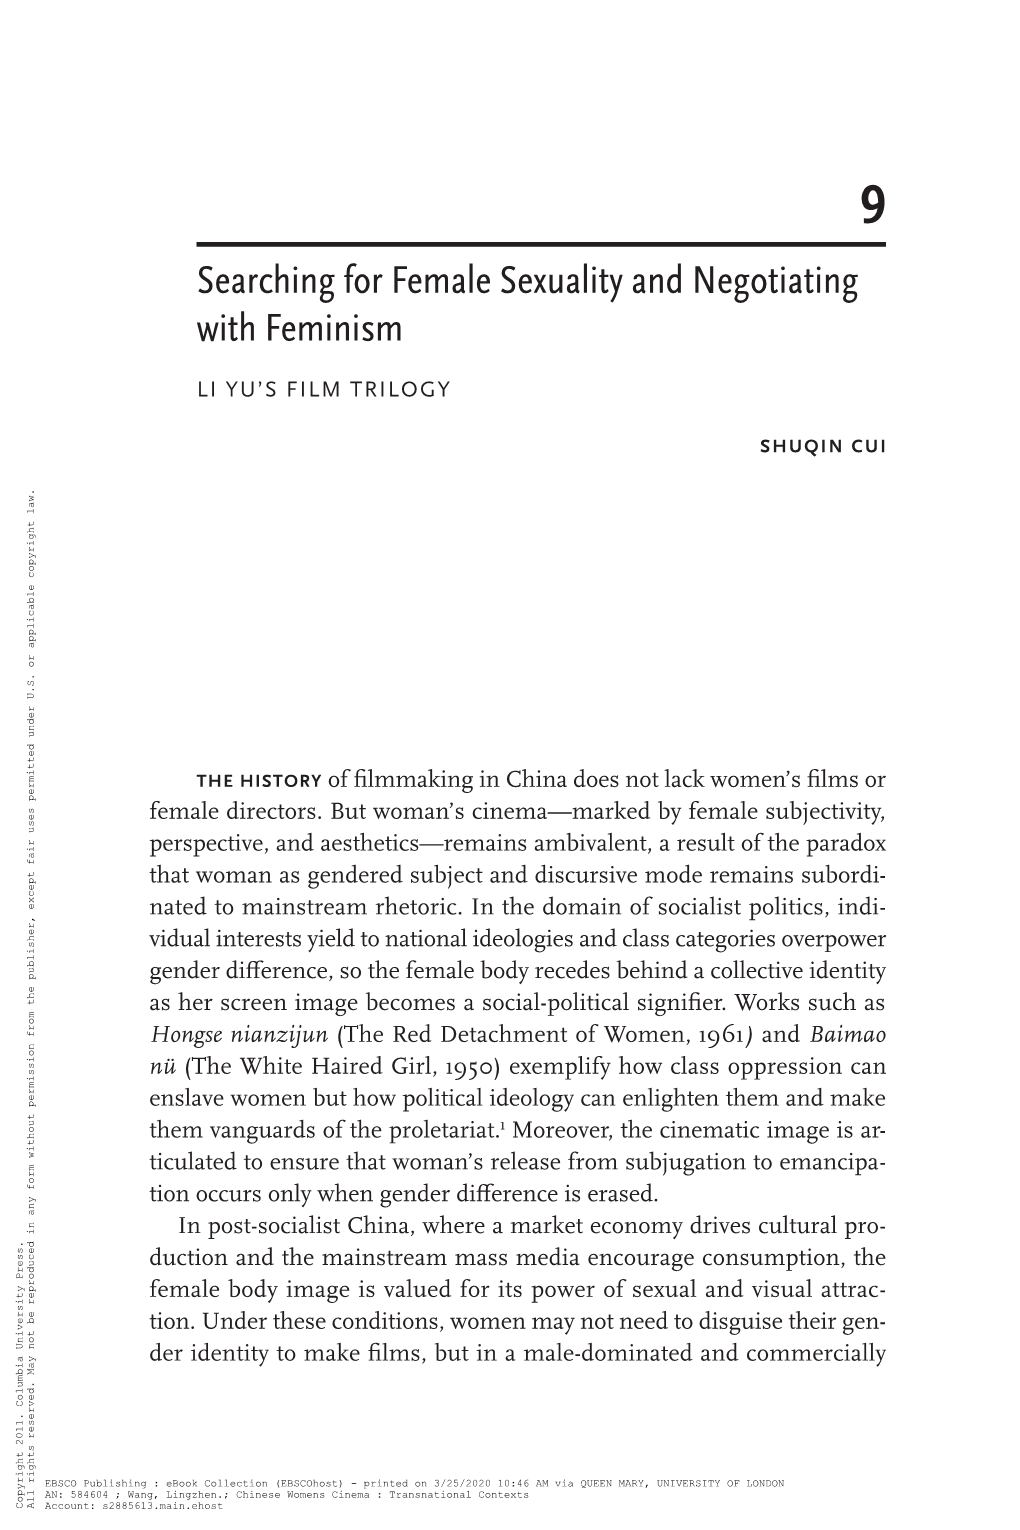 Searching for Female Sexuality and Negotiating with Feminism